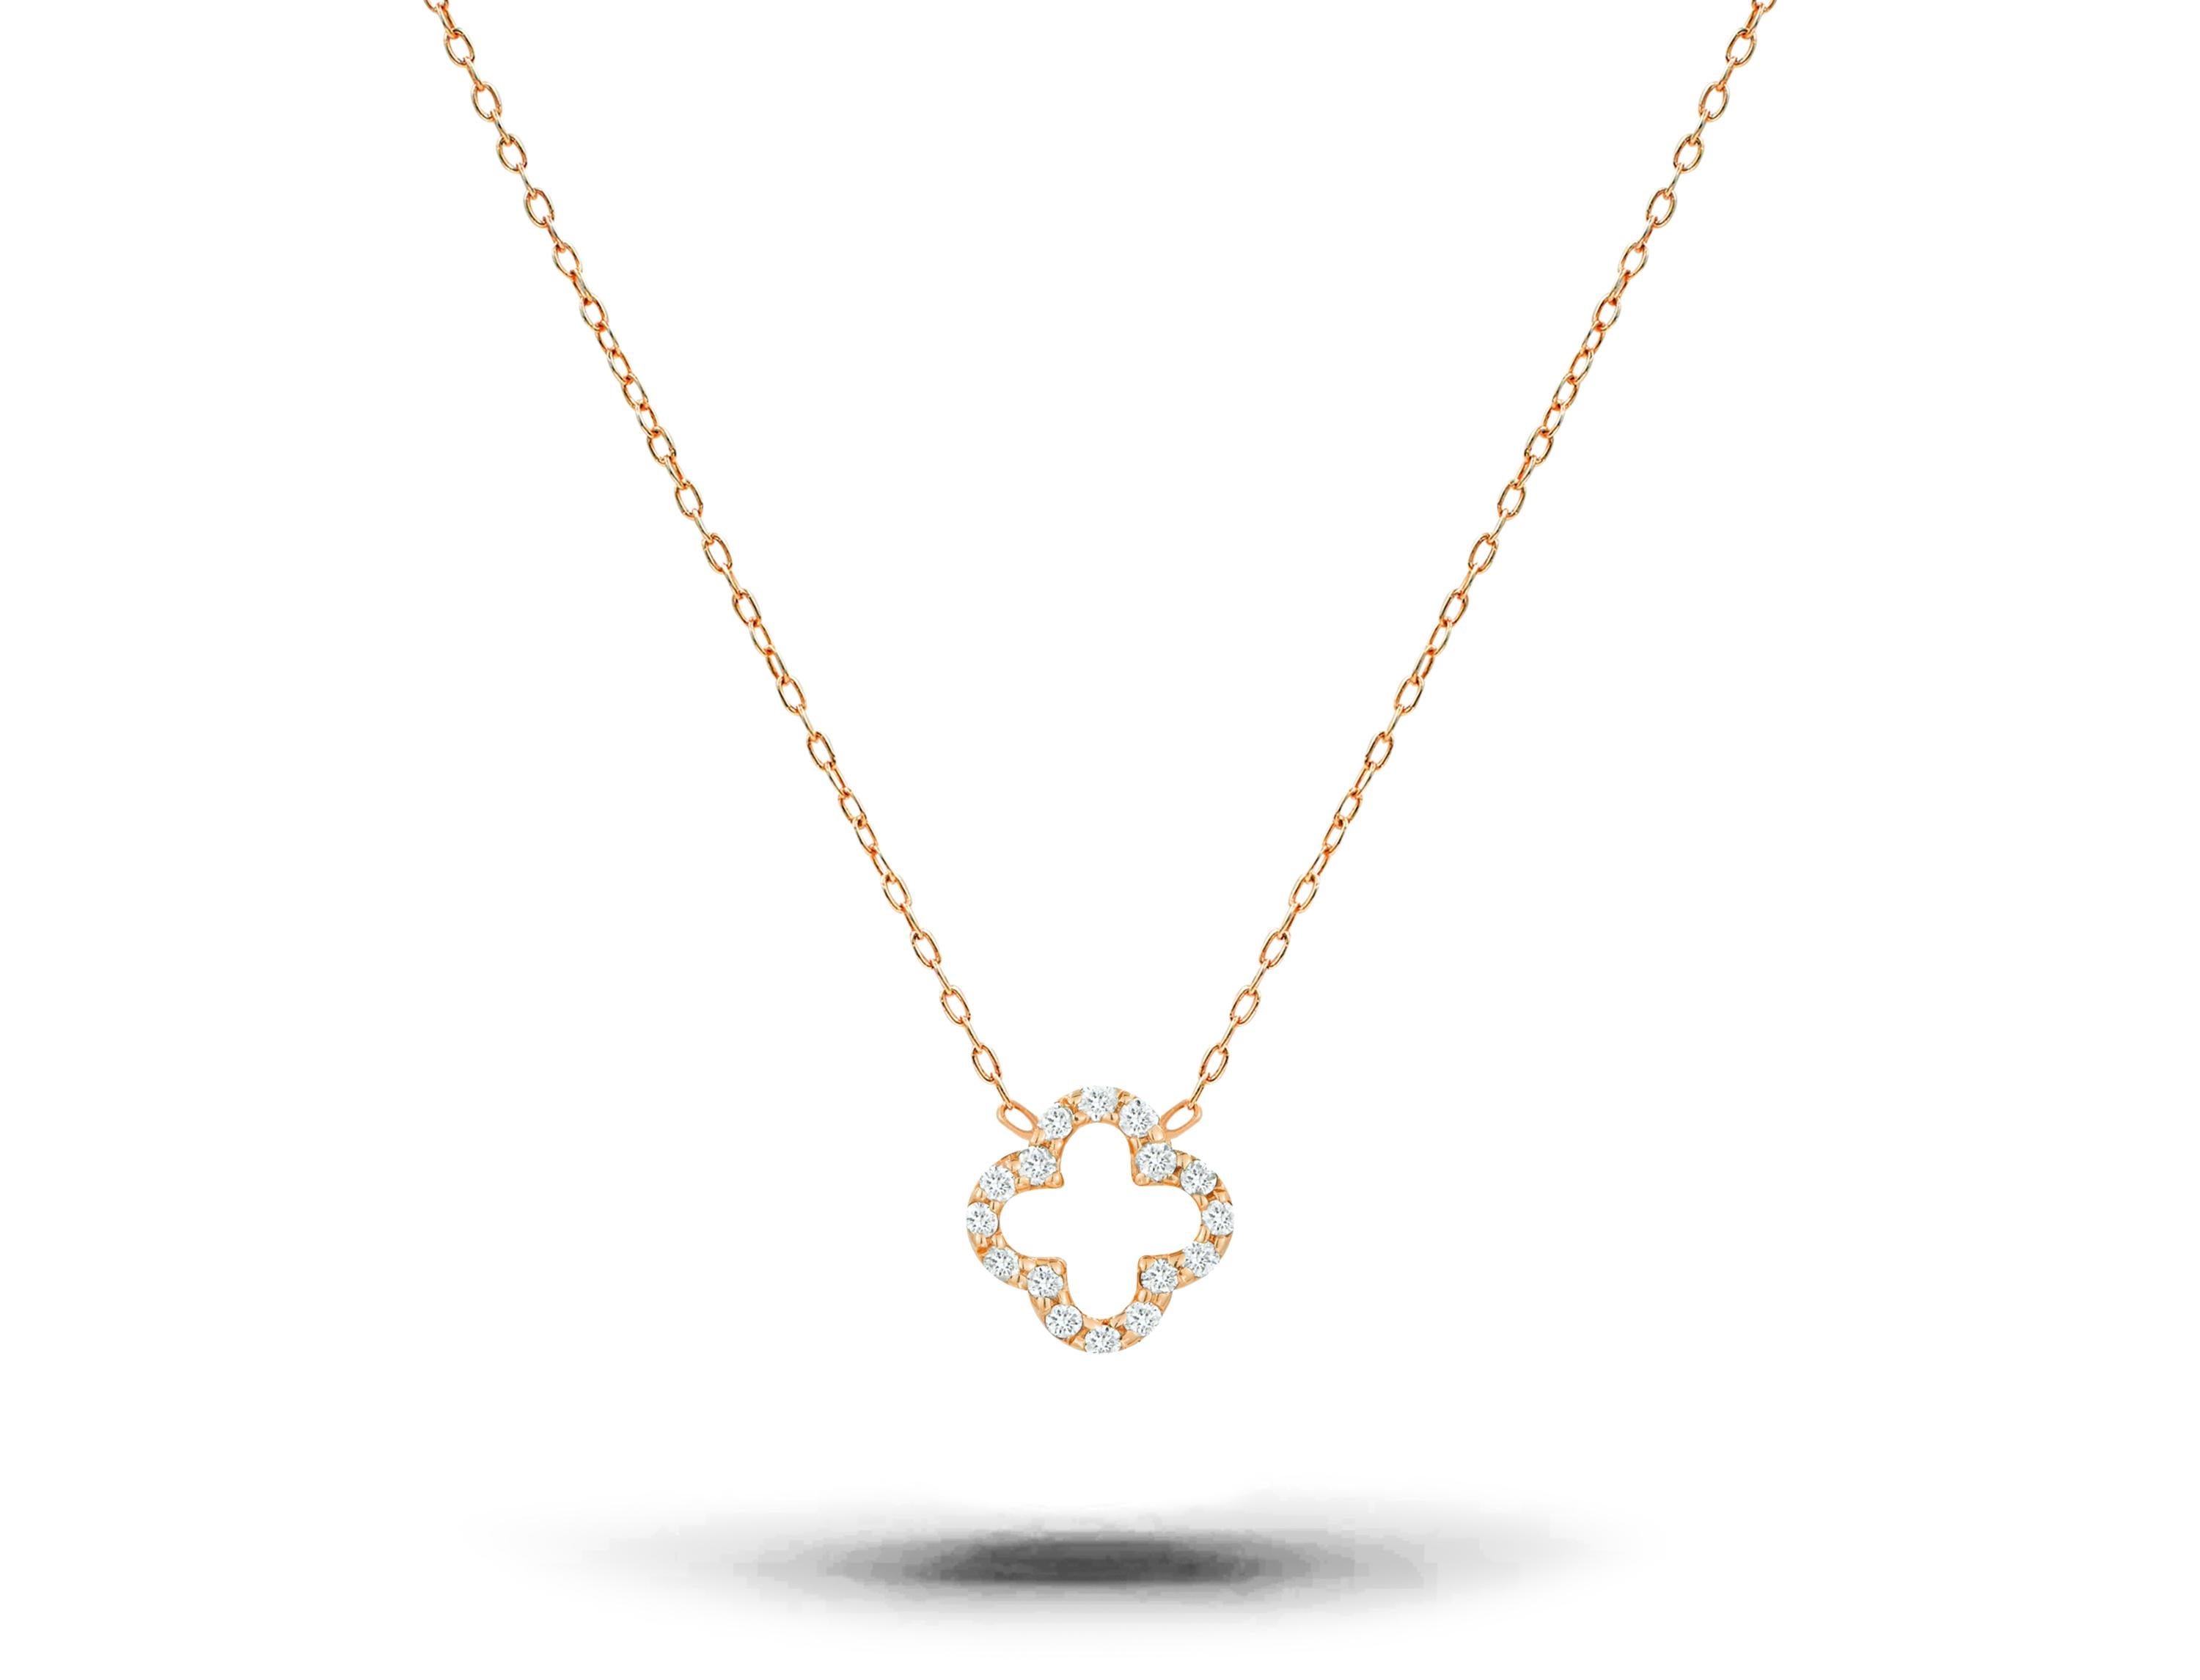 Delicate Minimal Necklace is made of 14k solid gold.
Available in three colors of gold: Rose Gold / White Gold / Yellow Gold.

Natural genuine round cut diamond each diamond is hand selected by me to ensure quality and set by a master setter in our